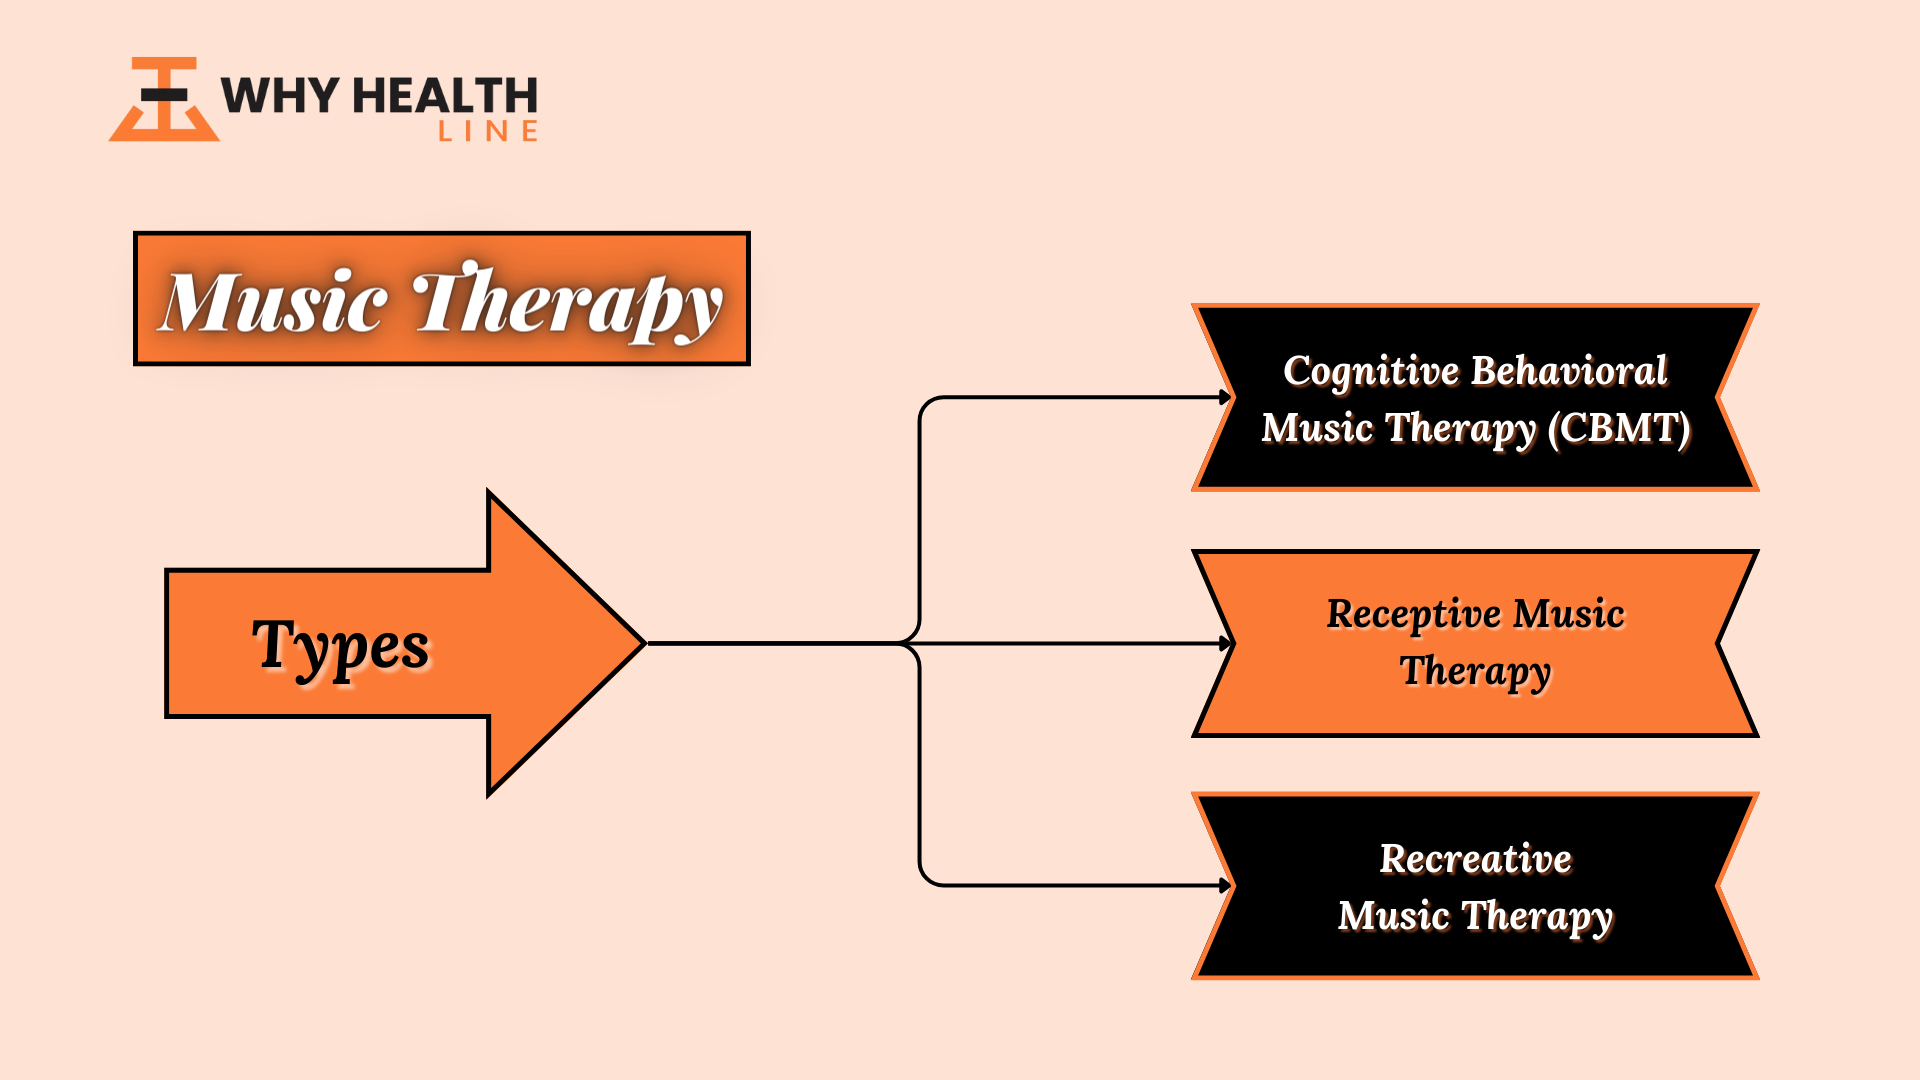 Types of Music Therapy